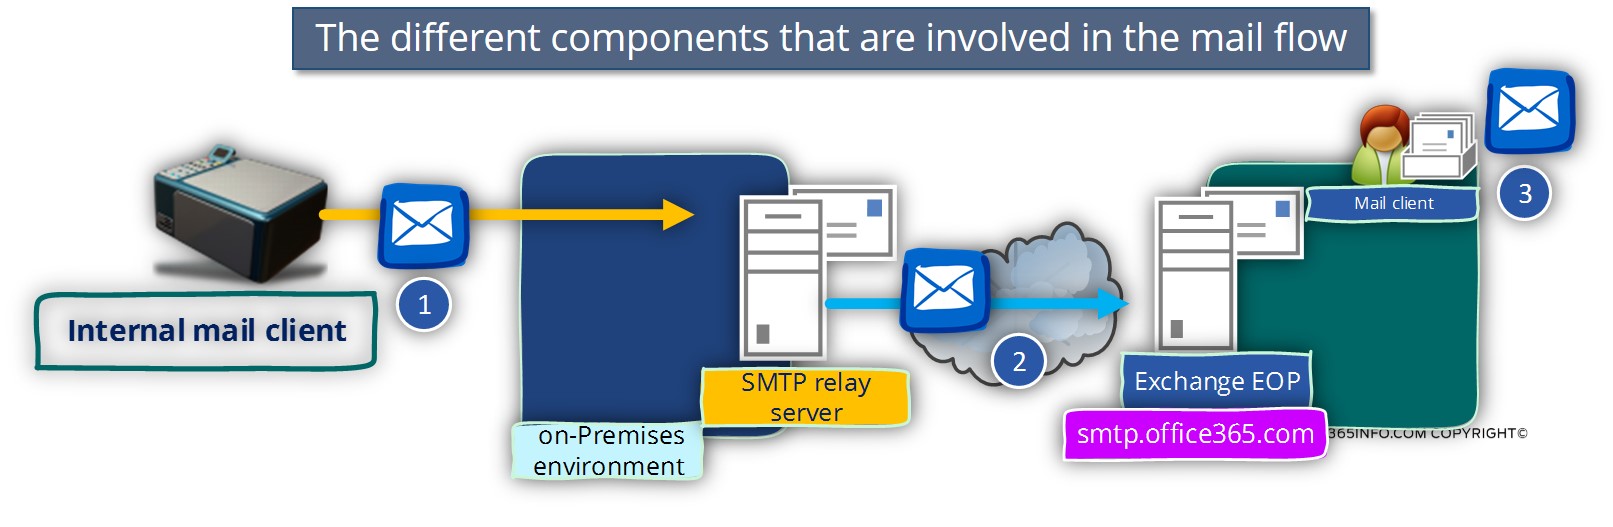 The different components that are involved in the mail flow